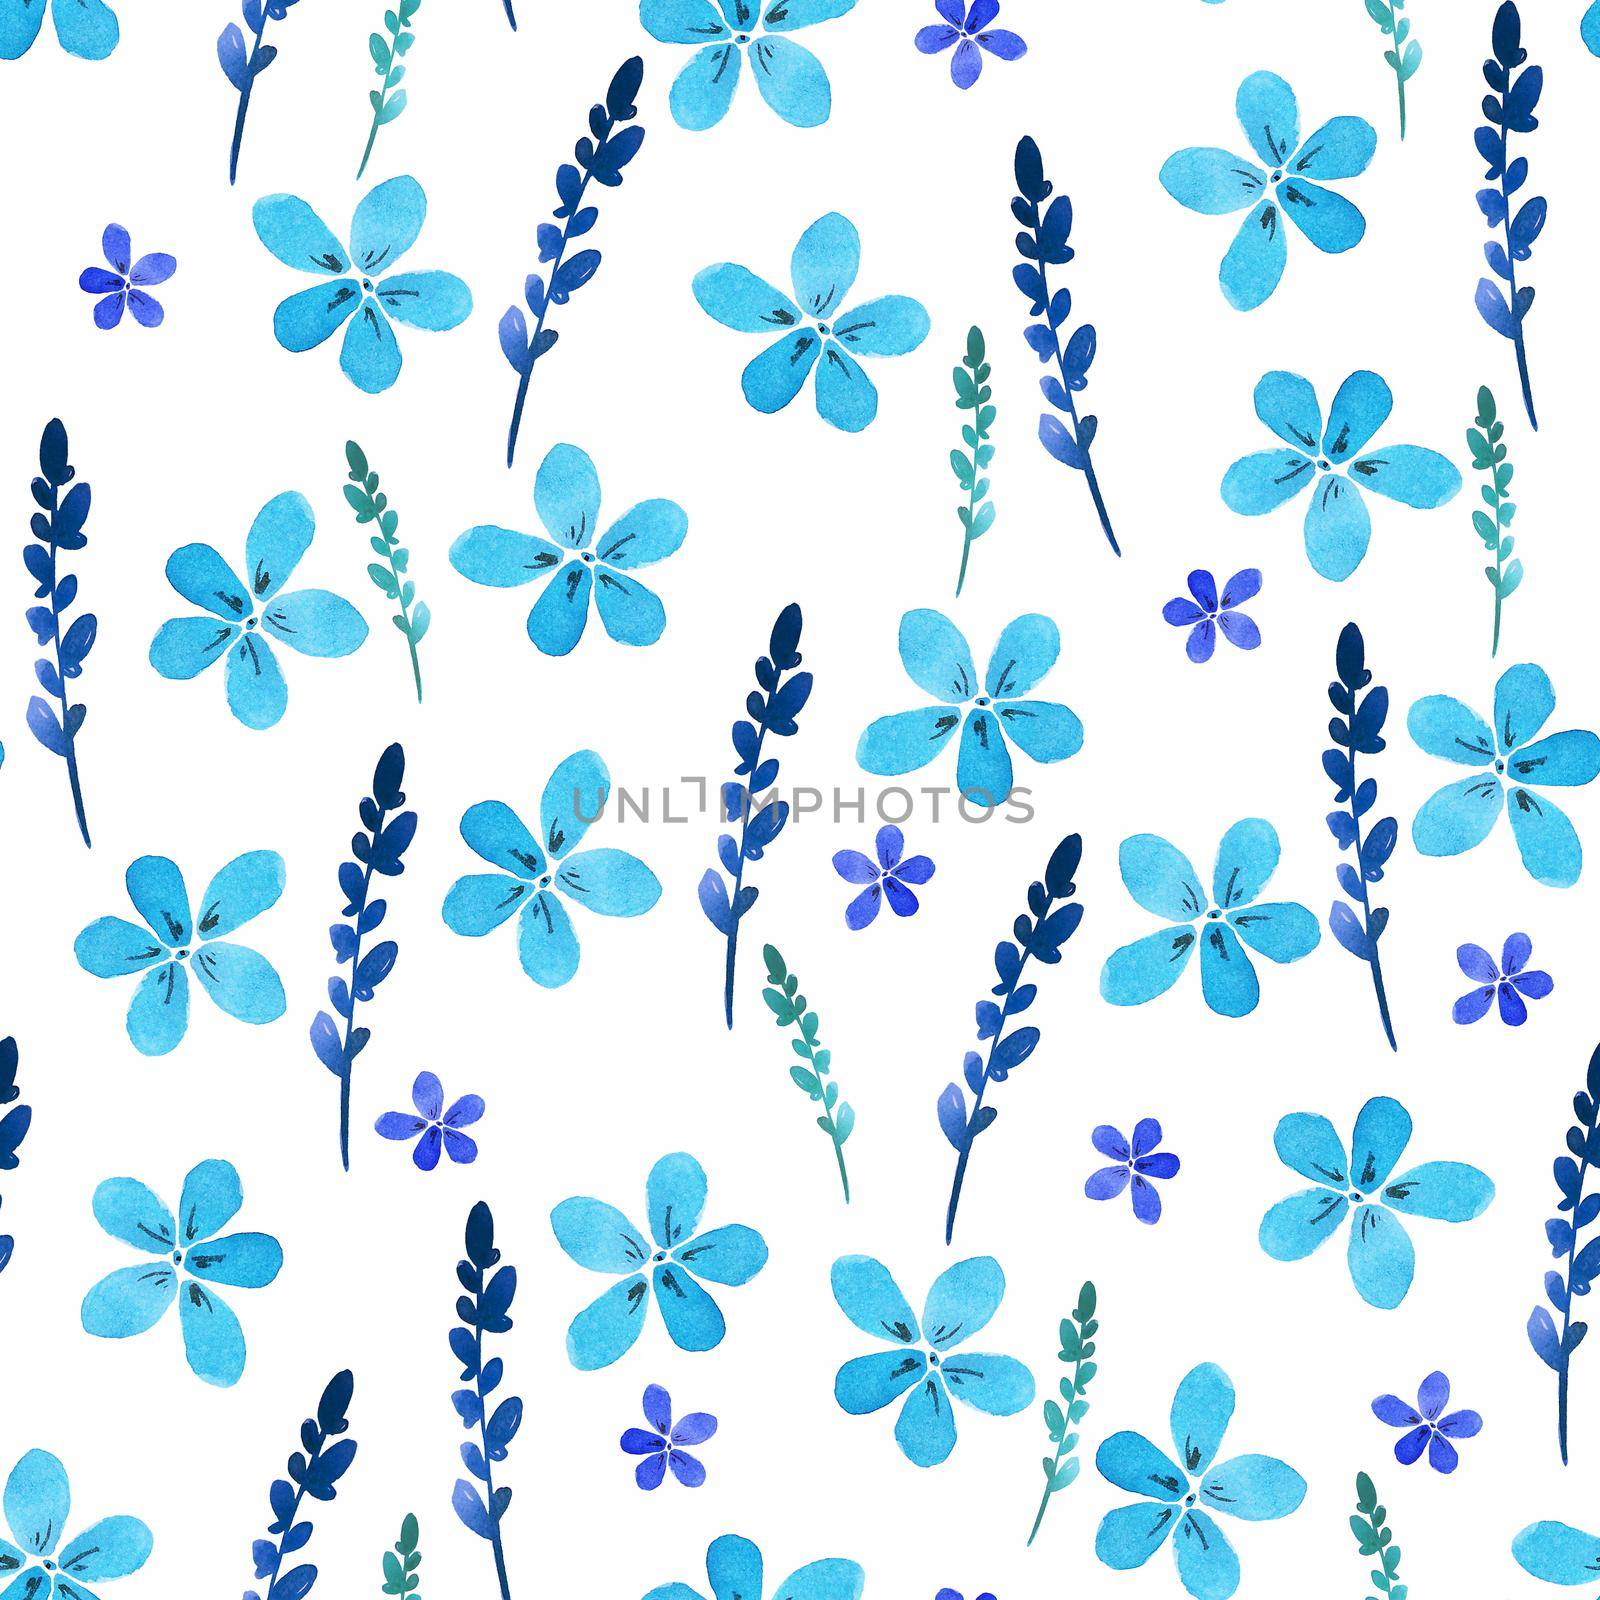 Seamless floral pattern with watercolor blue flowers and leaves in vintage style. Hand made. Ornate for textile, fabric, wallpaper. Nature illustration. Painting elements. by DesignAB